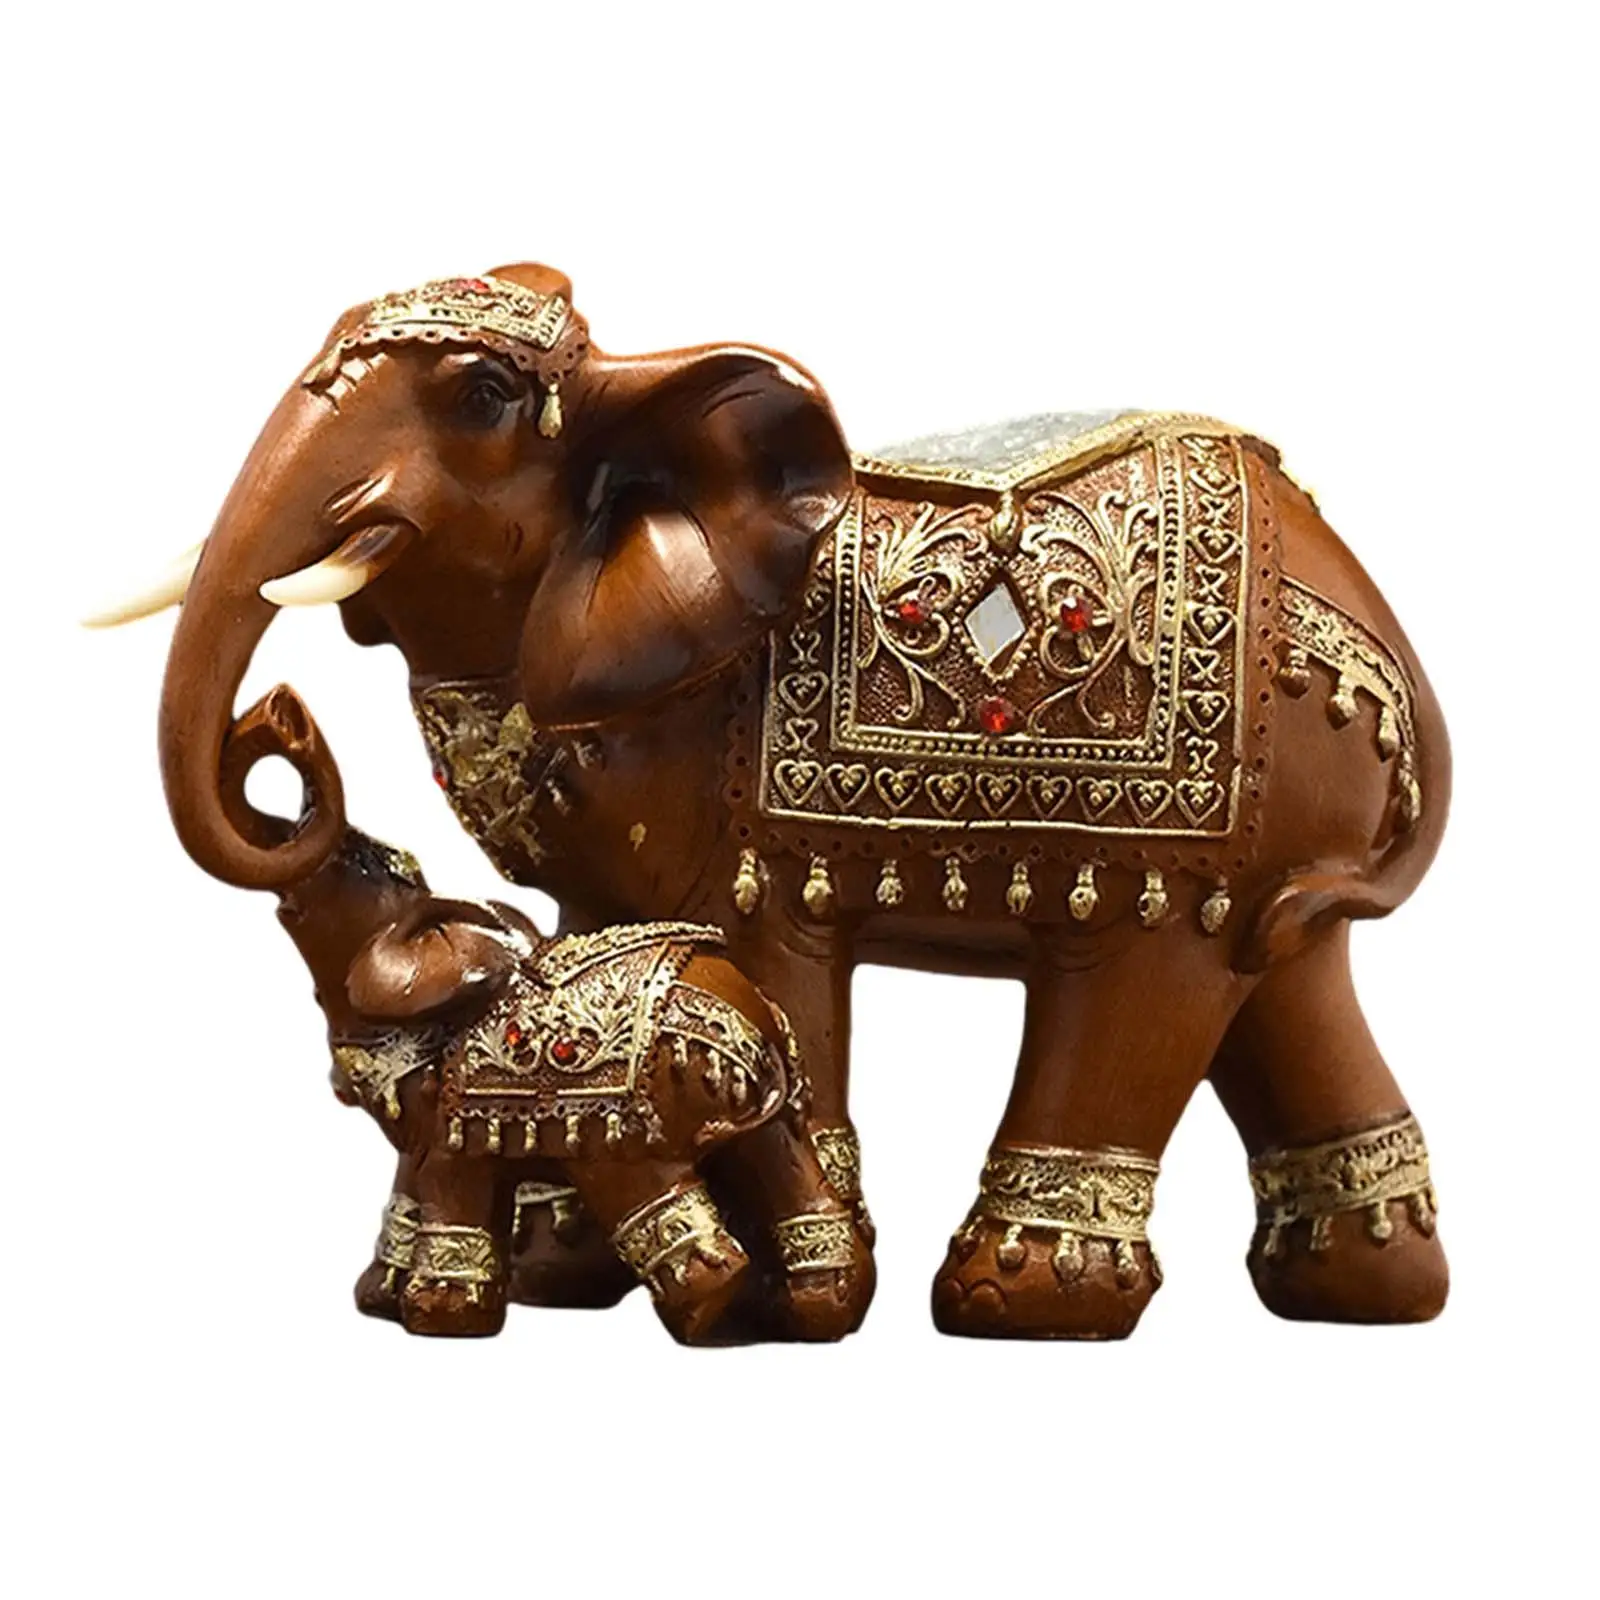 Mother and Child of Elephant Sculpture Statue Tabletop Decoration Fengshui Ornament for Modern Styled Centerpiece Delicate